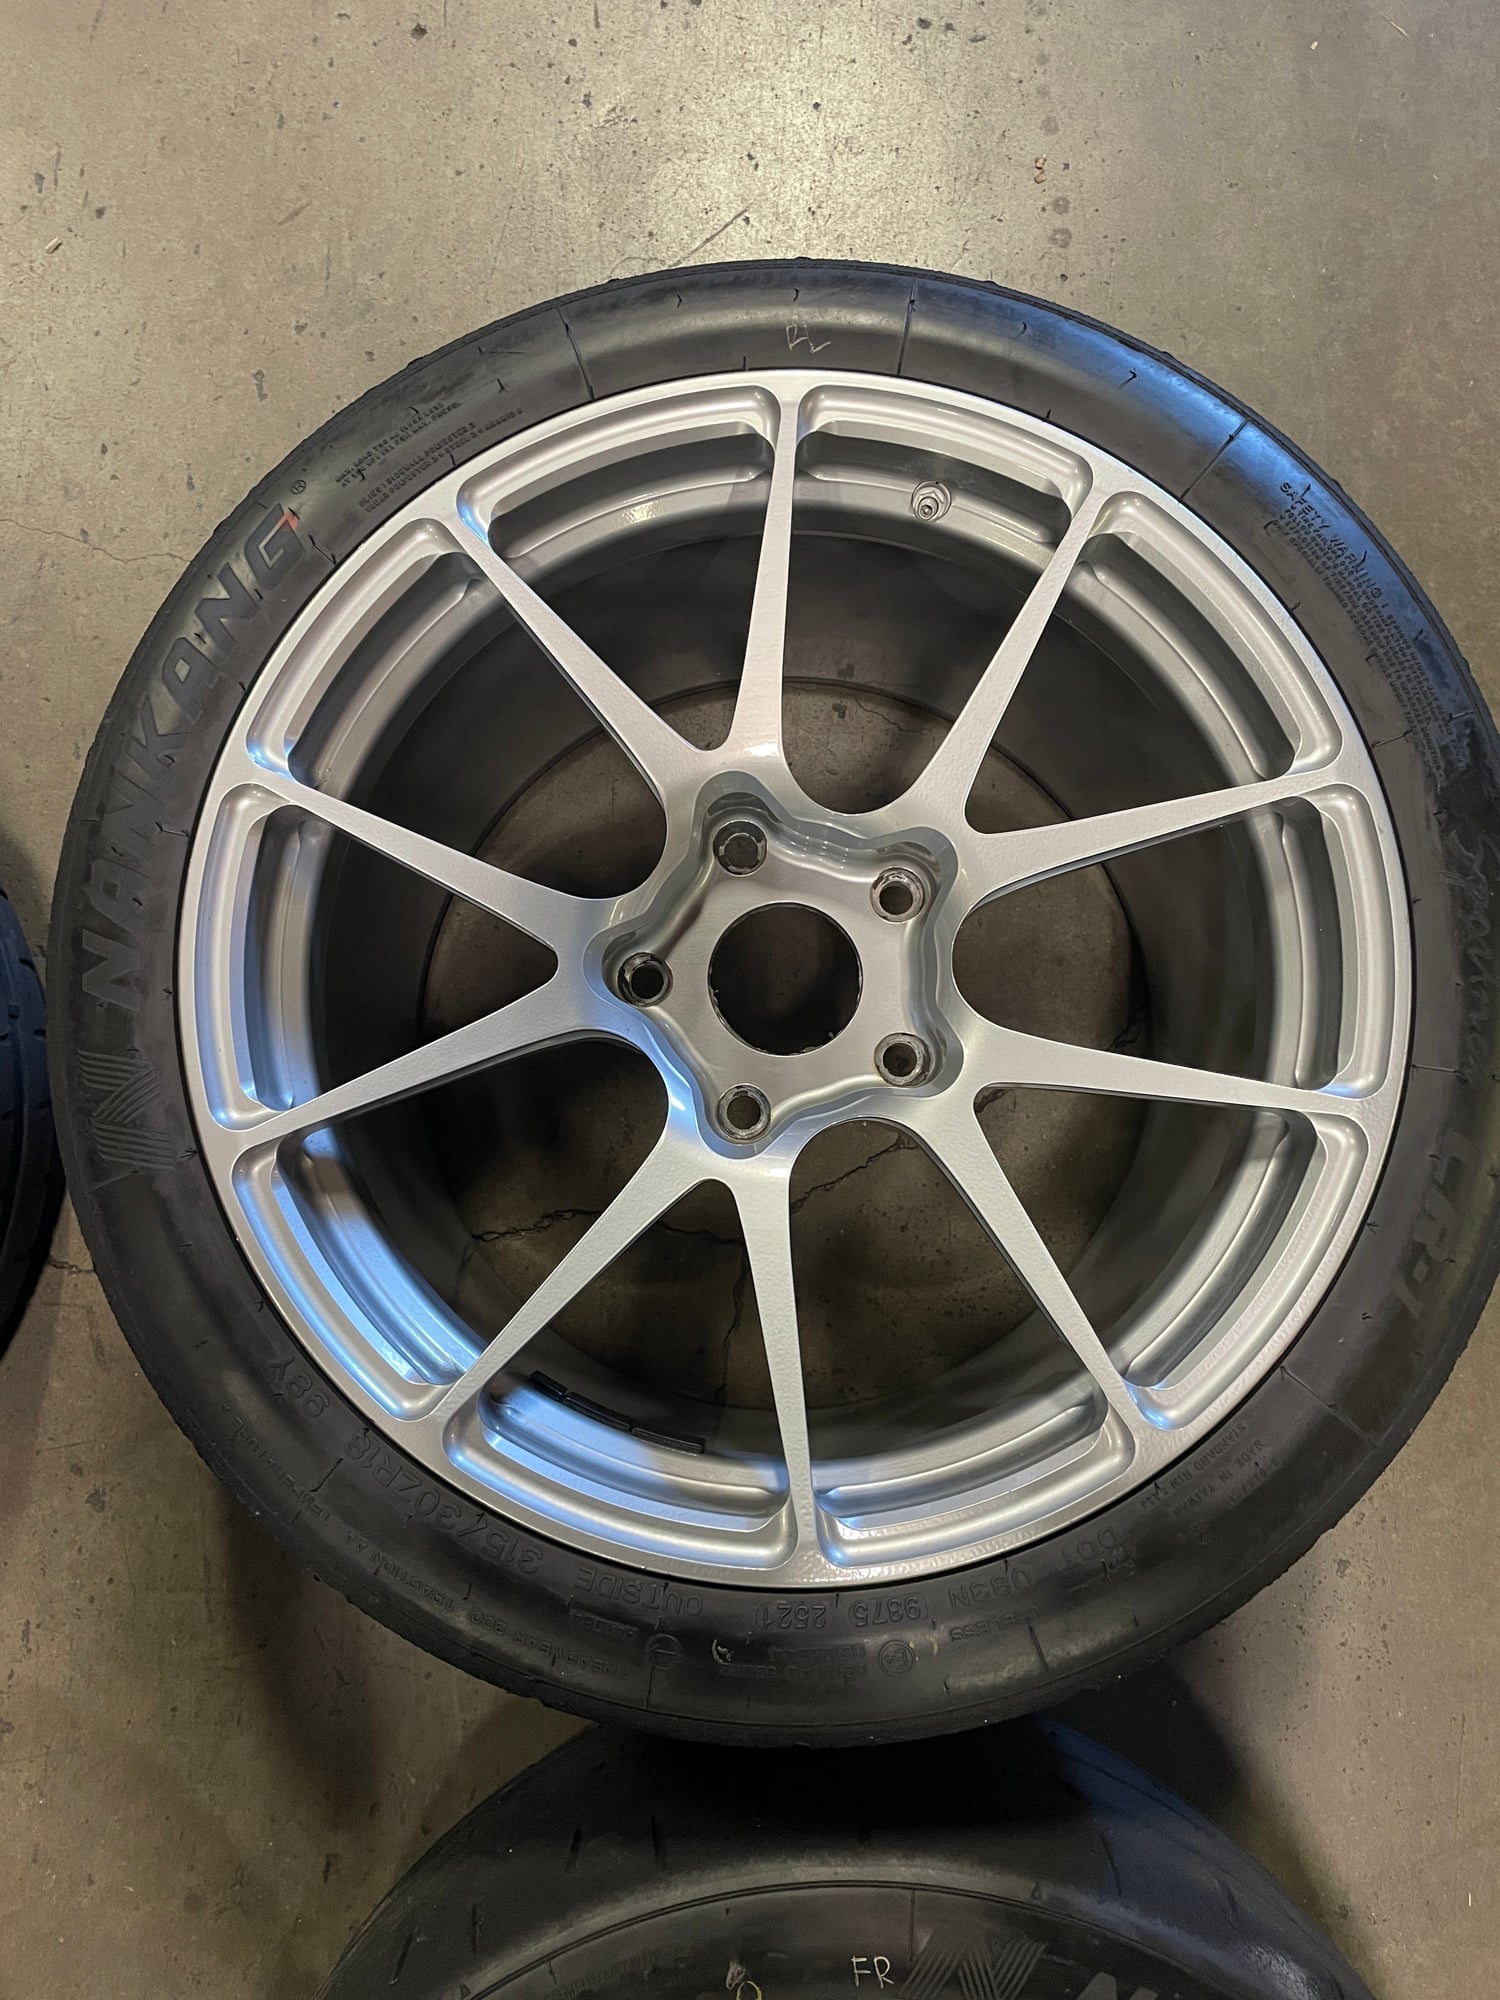 Wheels and Tires/Axles - FS: Forgeline GA1R 997/GT3 Narrow Body Fitment - Used - Hayward, CA 94545, United States